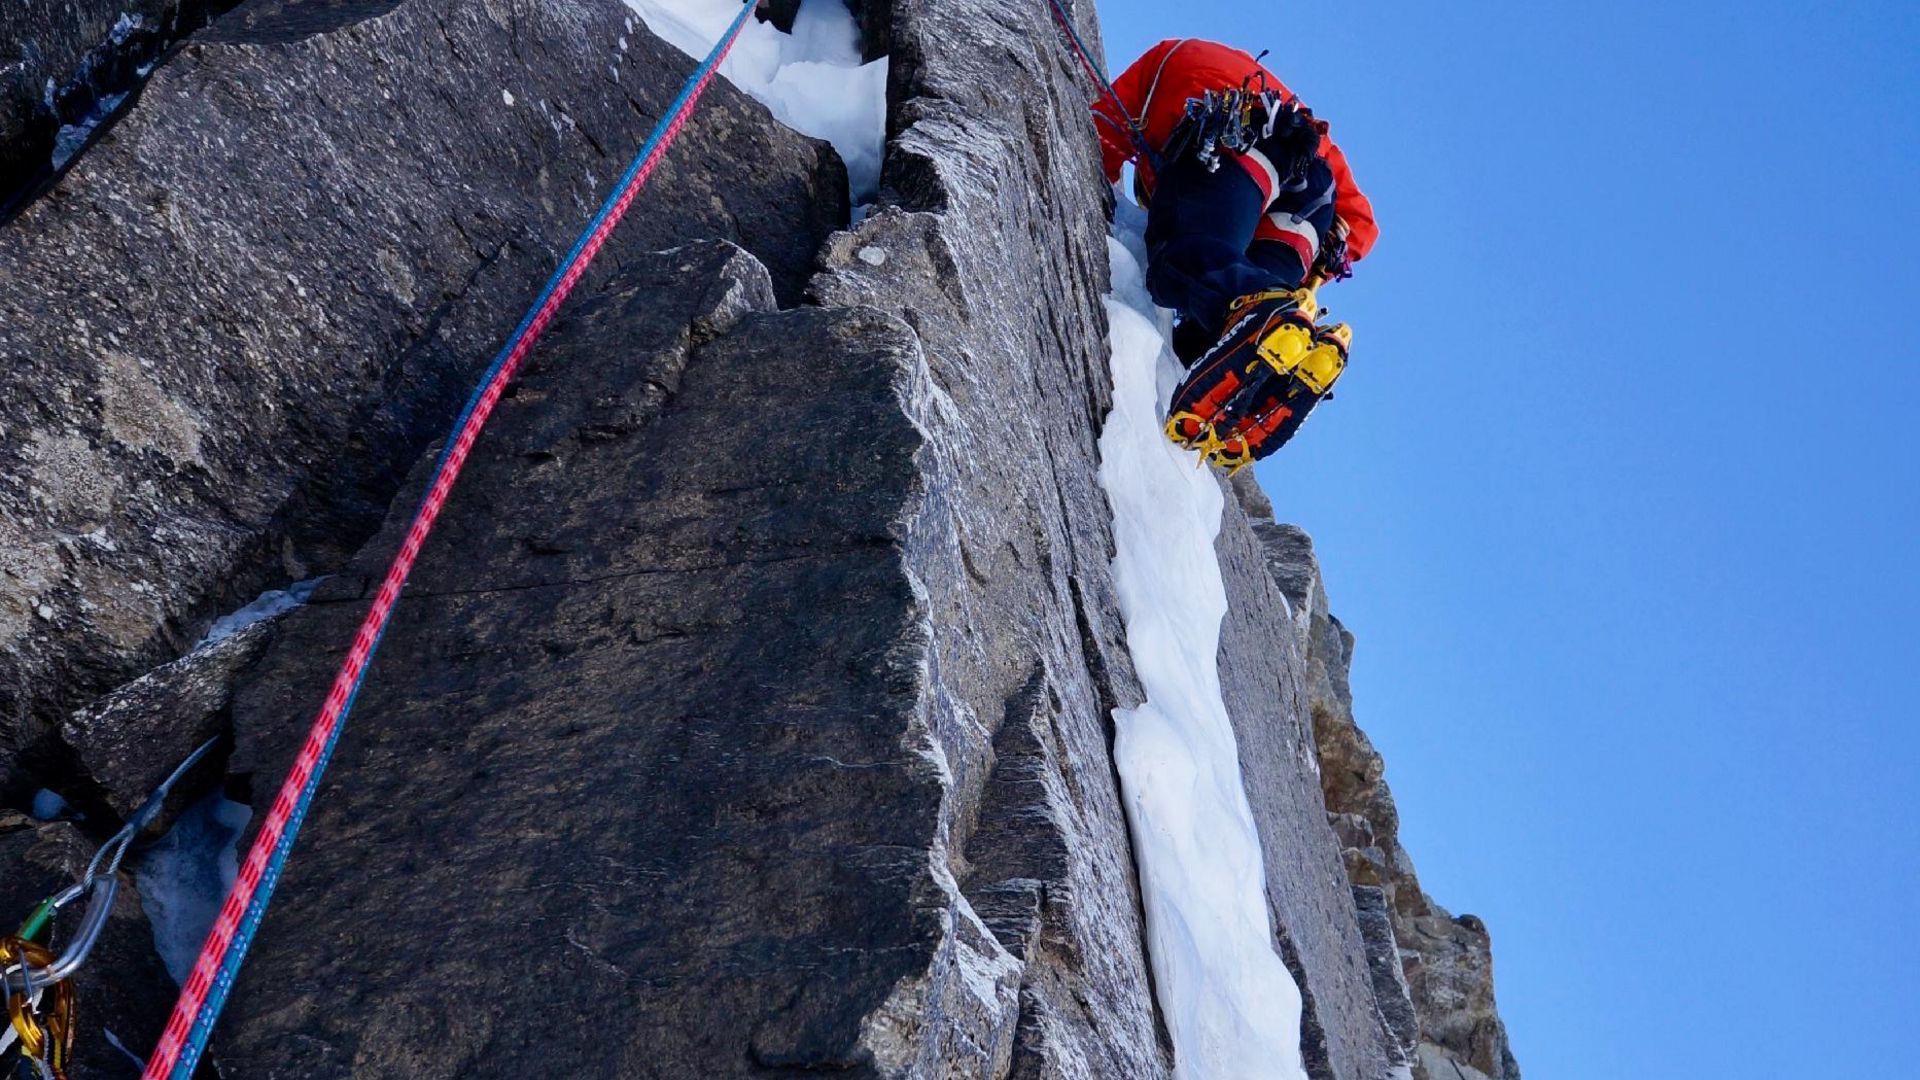 First ascent: “The adventures of Augie March”, Grossglockner area, Austria